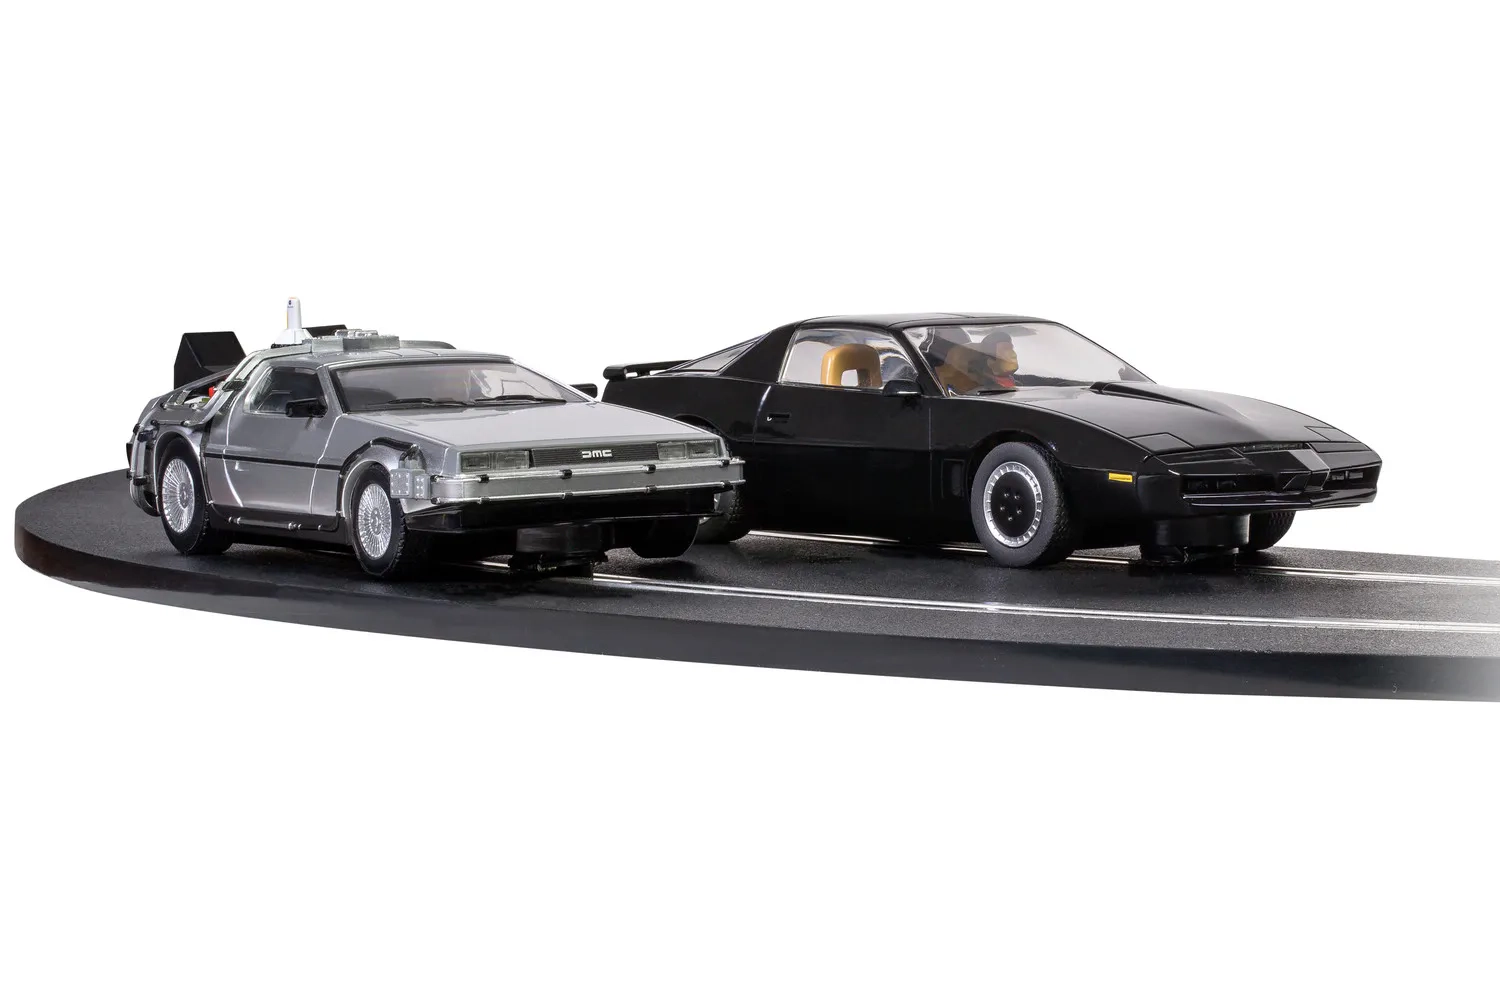 Scalextric 1980s TV - Back to the Future vs Knight Rider Race Set